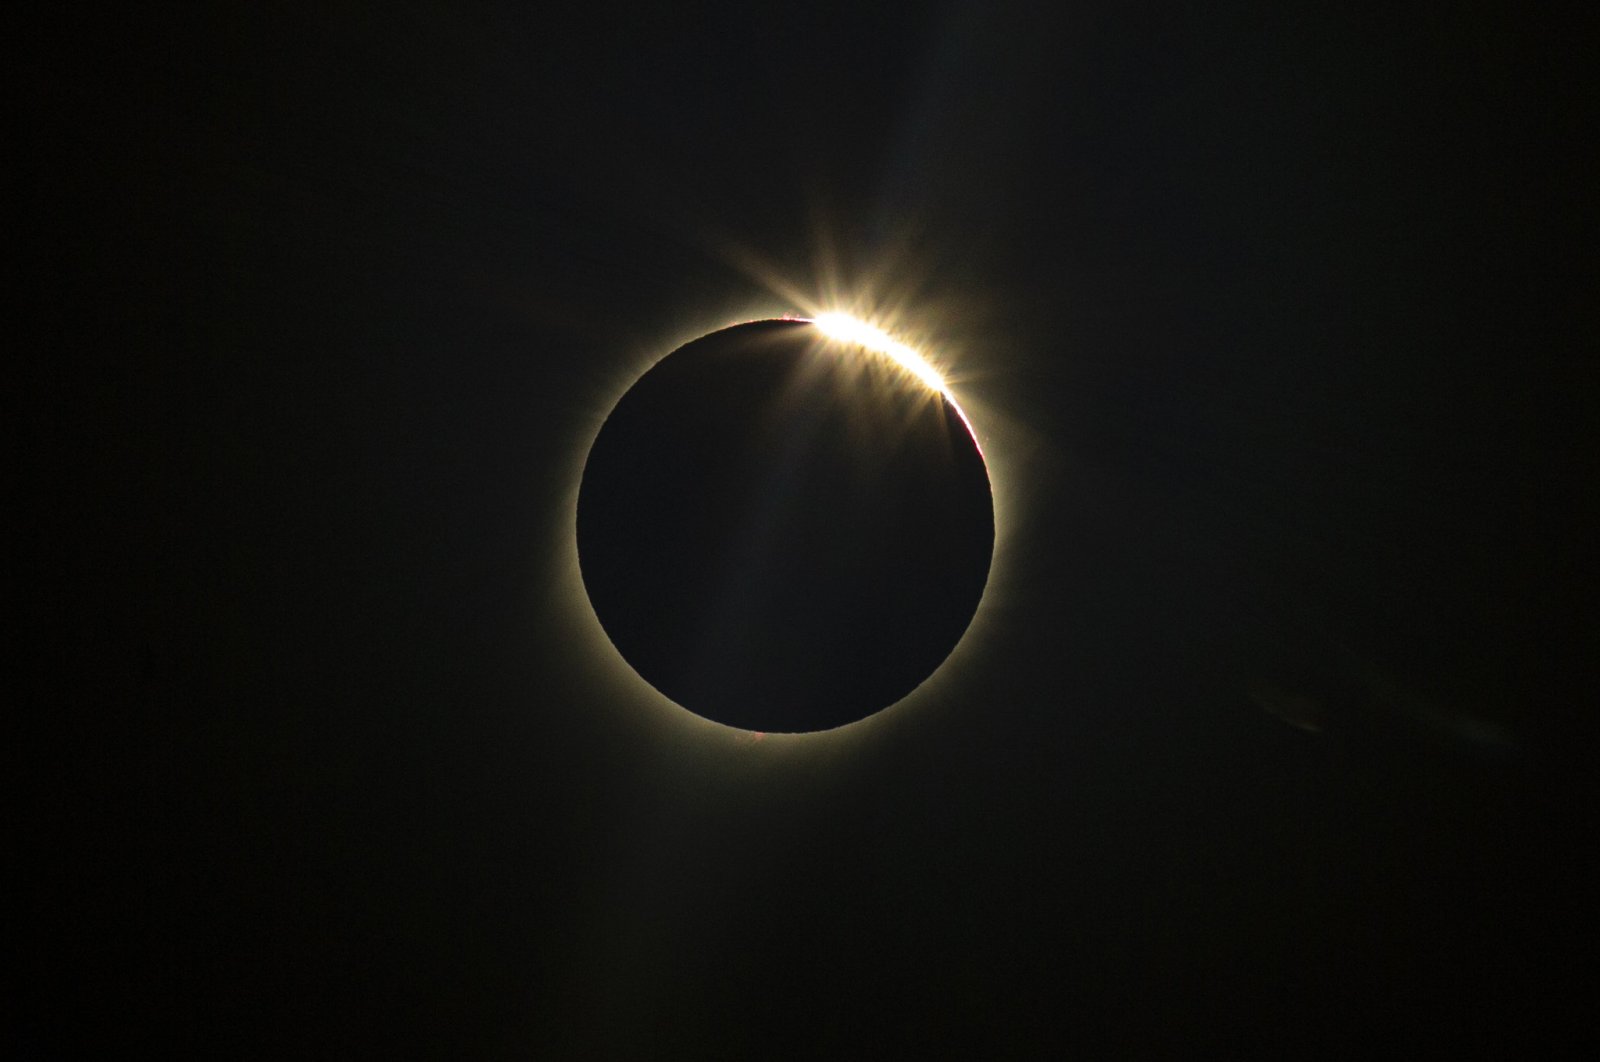 The moon blocks the sun during a total solar eclipse in La Higuera, Chile, Tuesday, July 2, 2019.  (AP Photo)